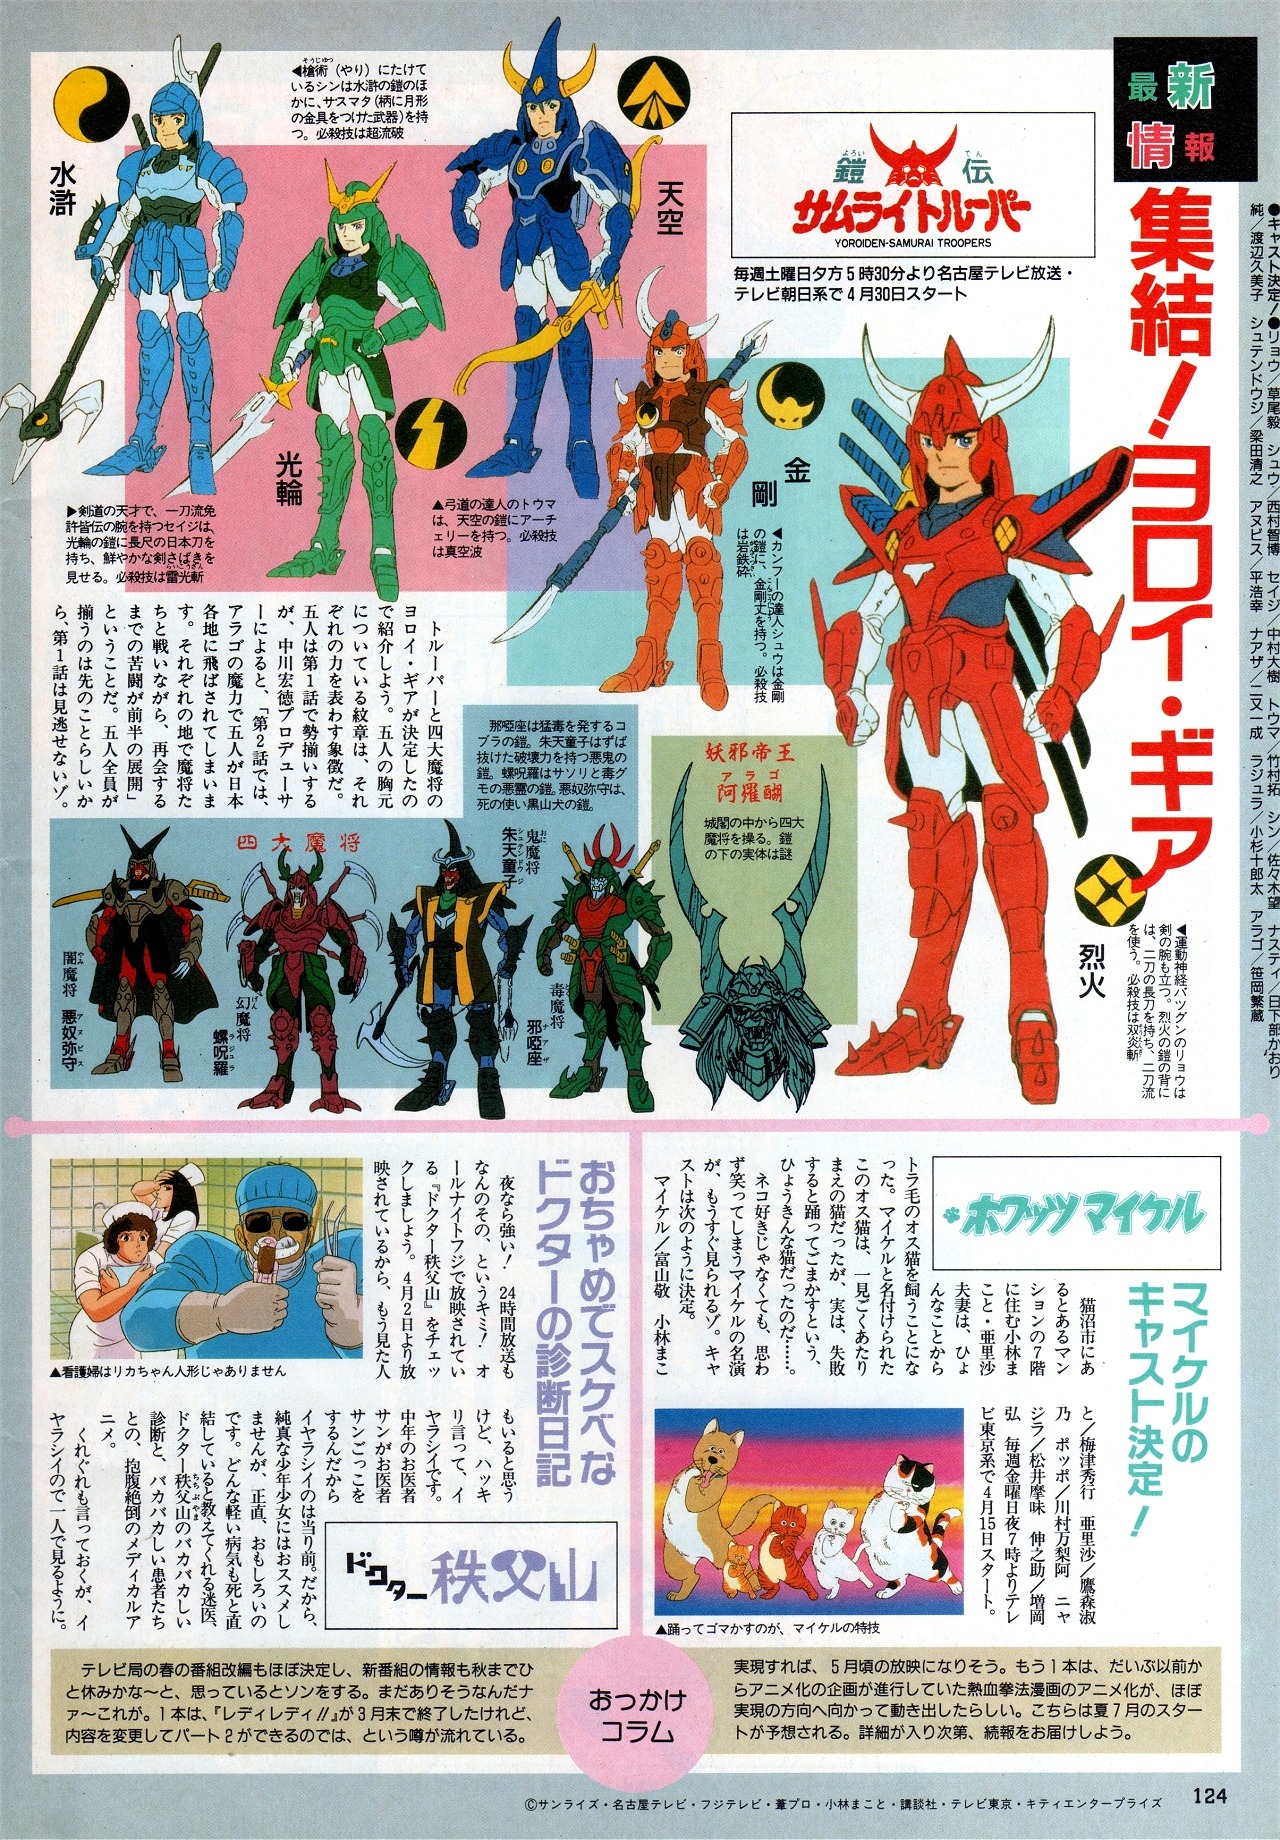 Yoroiden Samurai Troopers, What’s Michael and Doctor Chichibuyama in the May 1988 issue of Animedia.